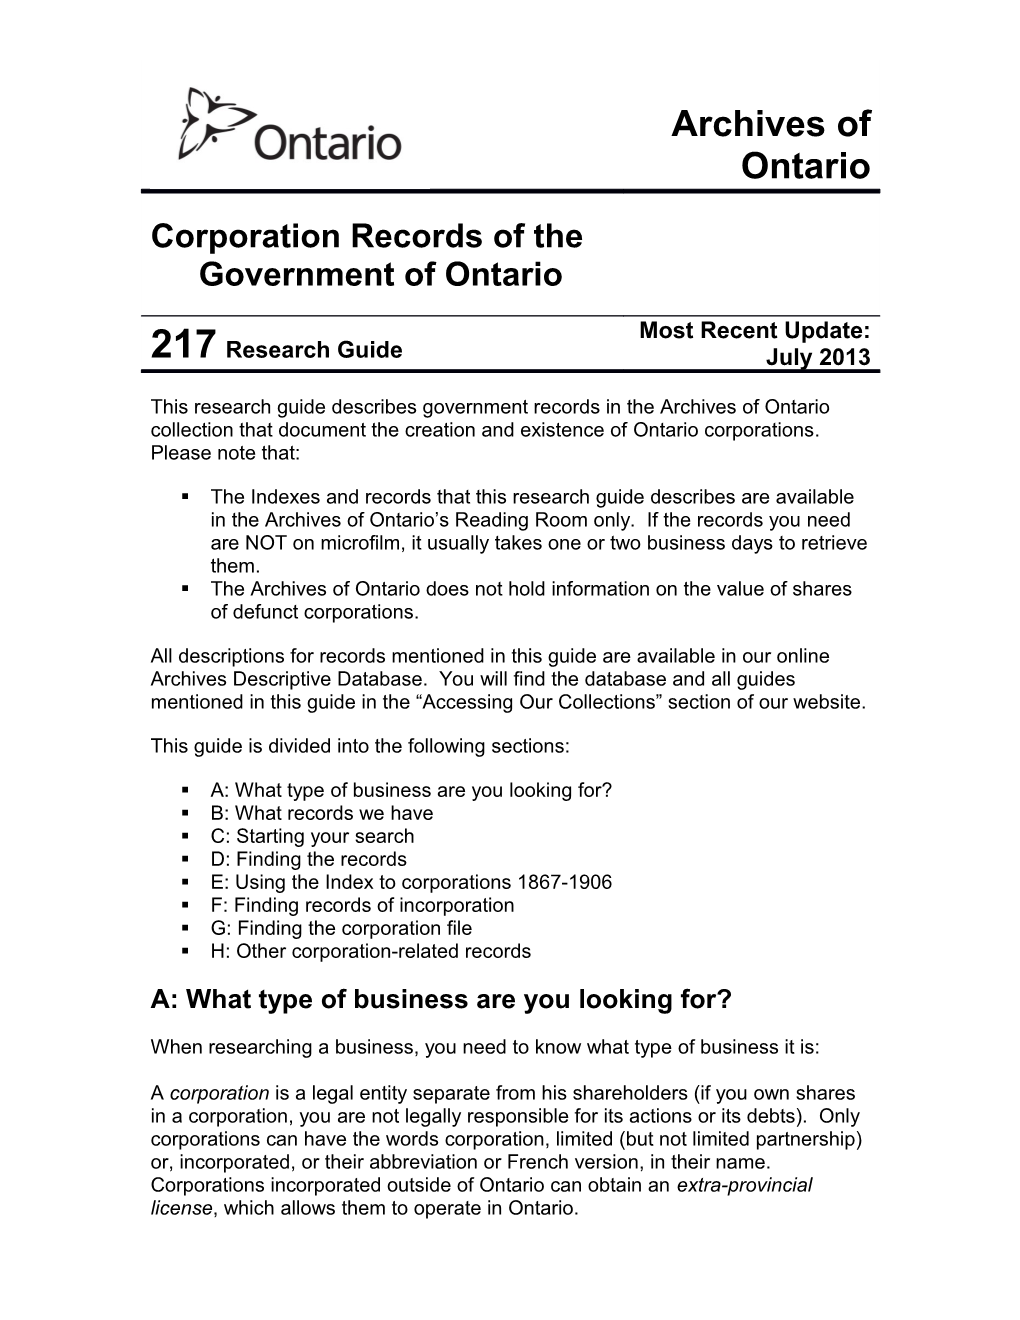 Research Guide 217: Corporation Records of the Government of Ontario